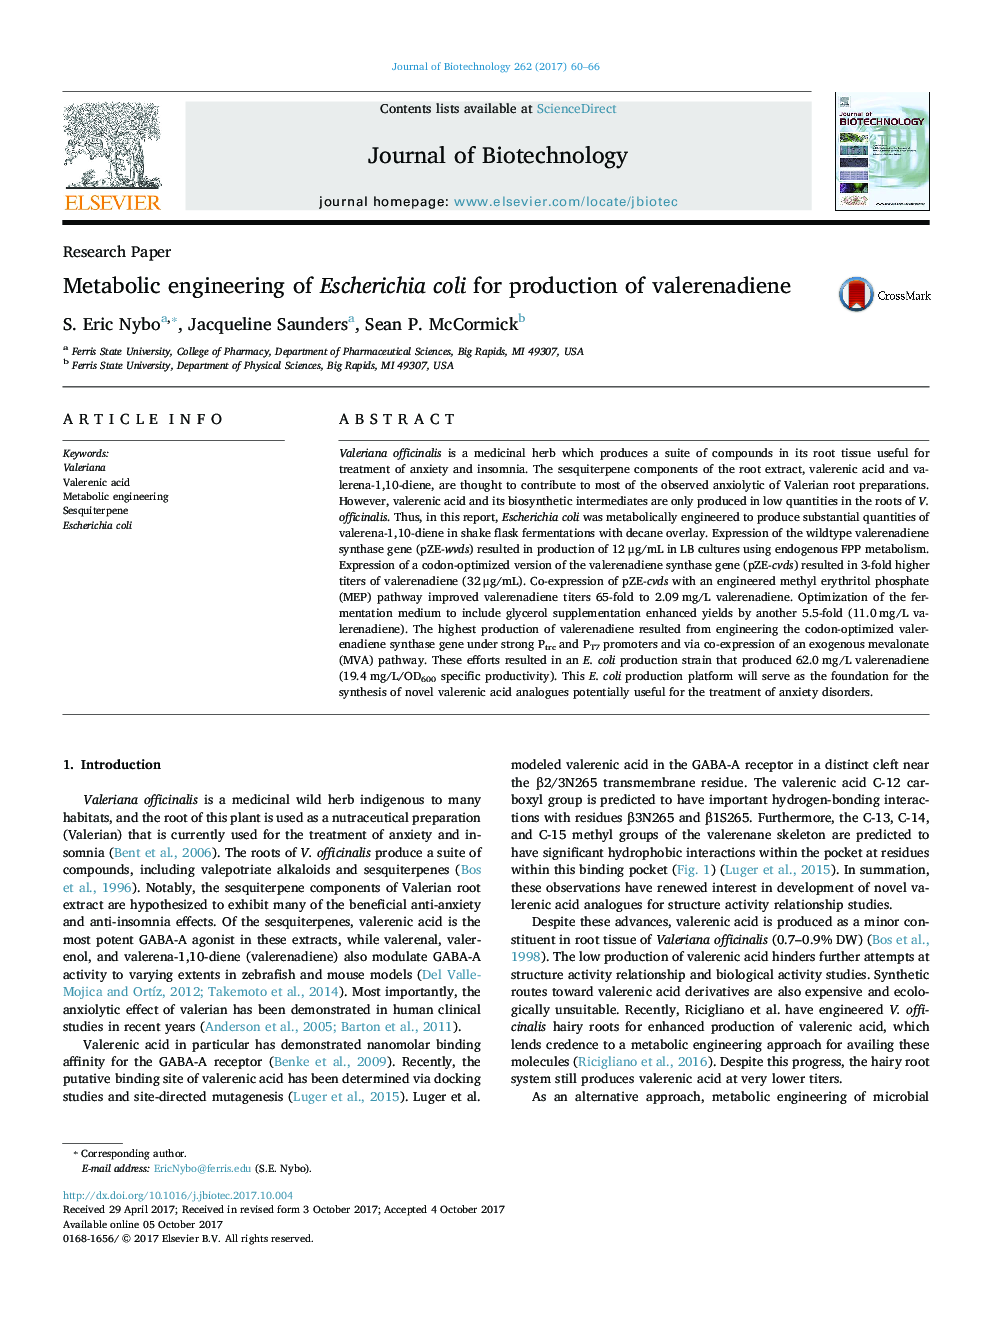 Research PaperMetabolic engineering of Escherichia coli for production of valerenadiene